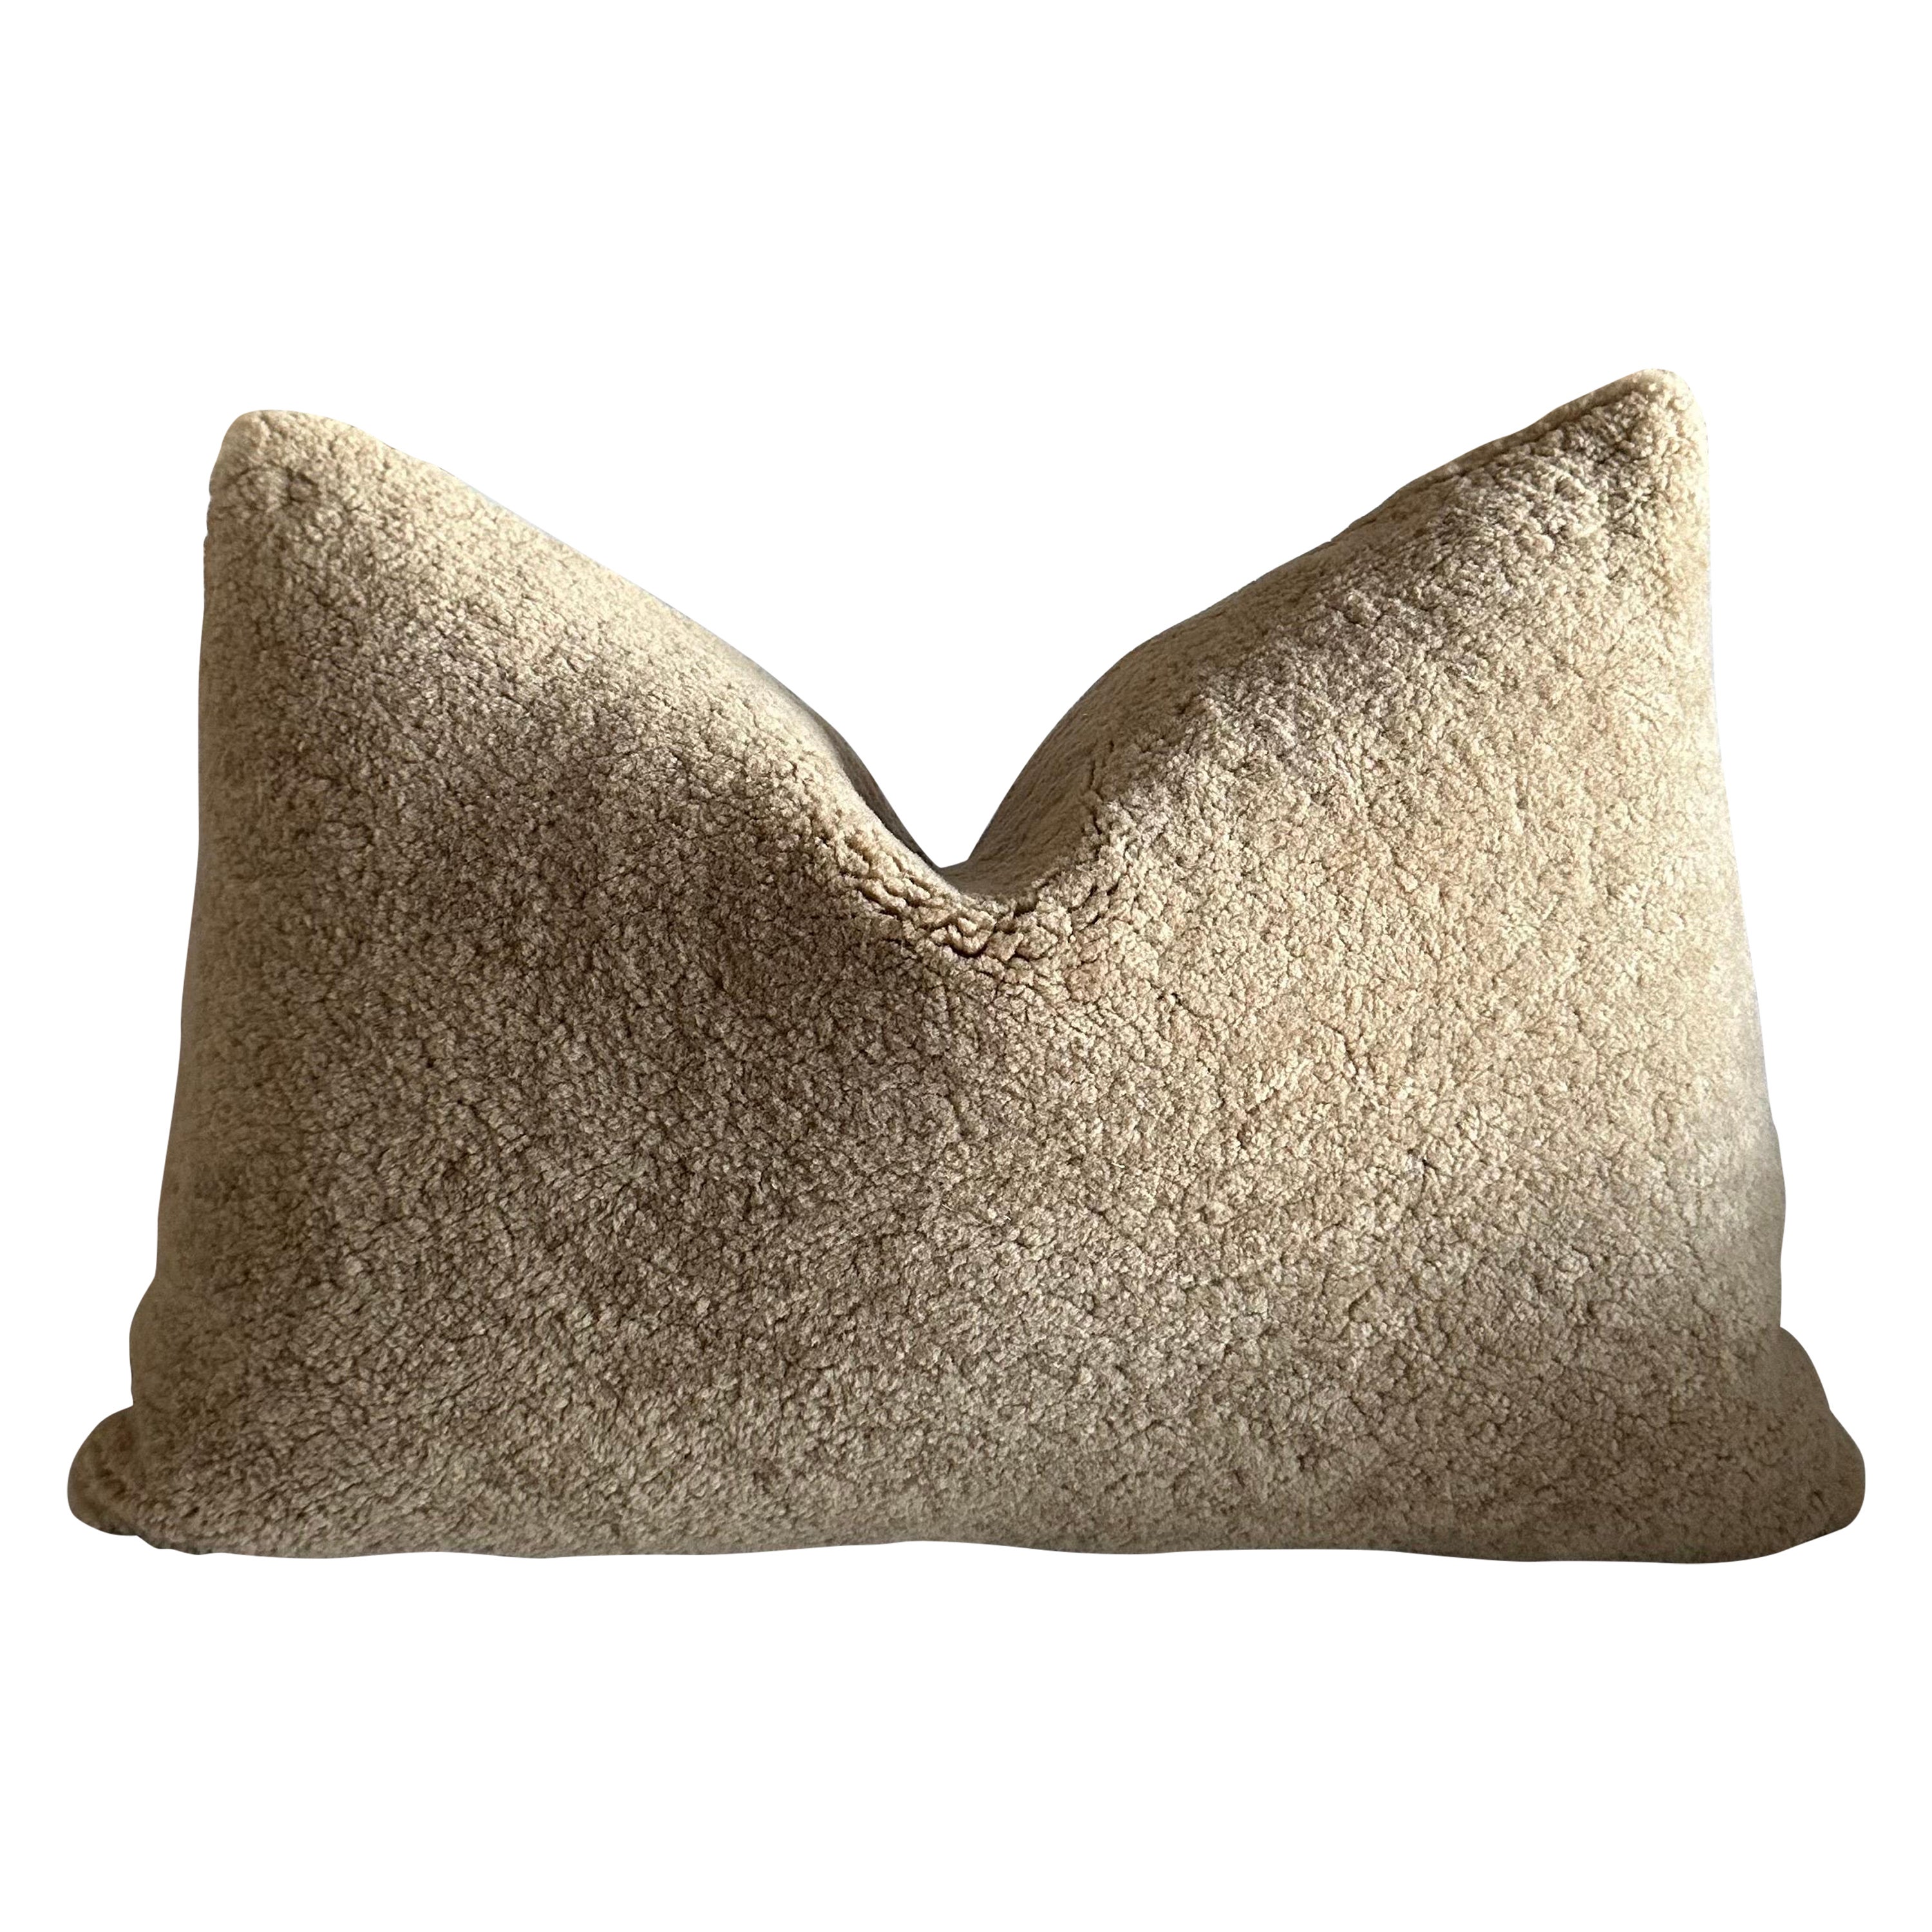 Natural Shearling Lumbar Pillow in Cappuccino Color with Brass Zipper For Sale